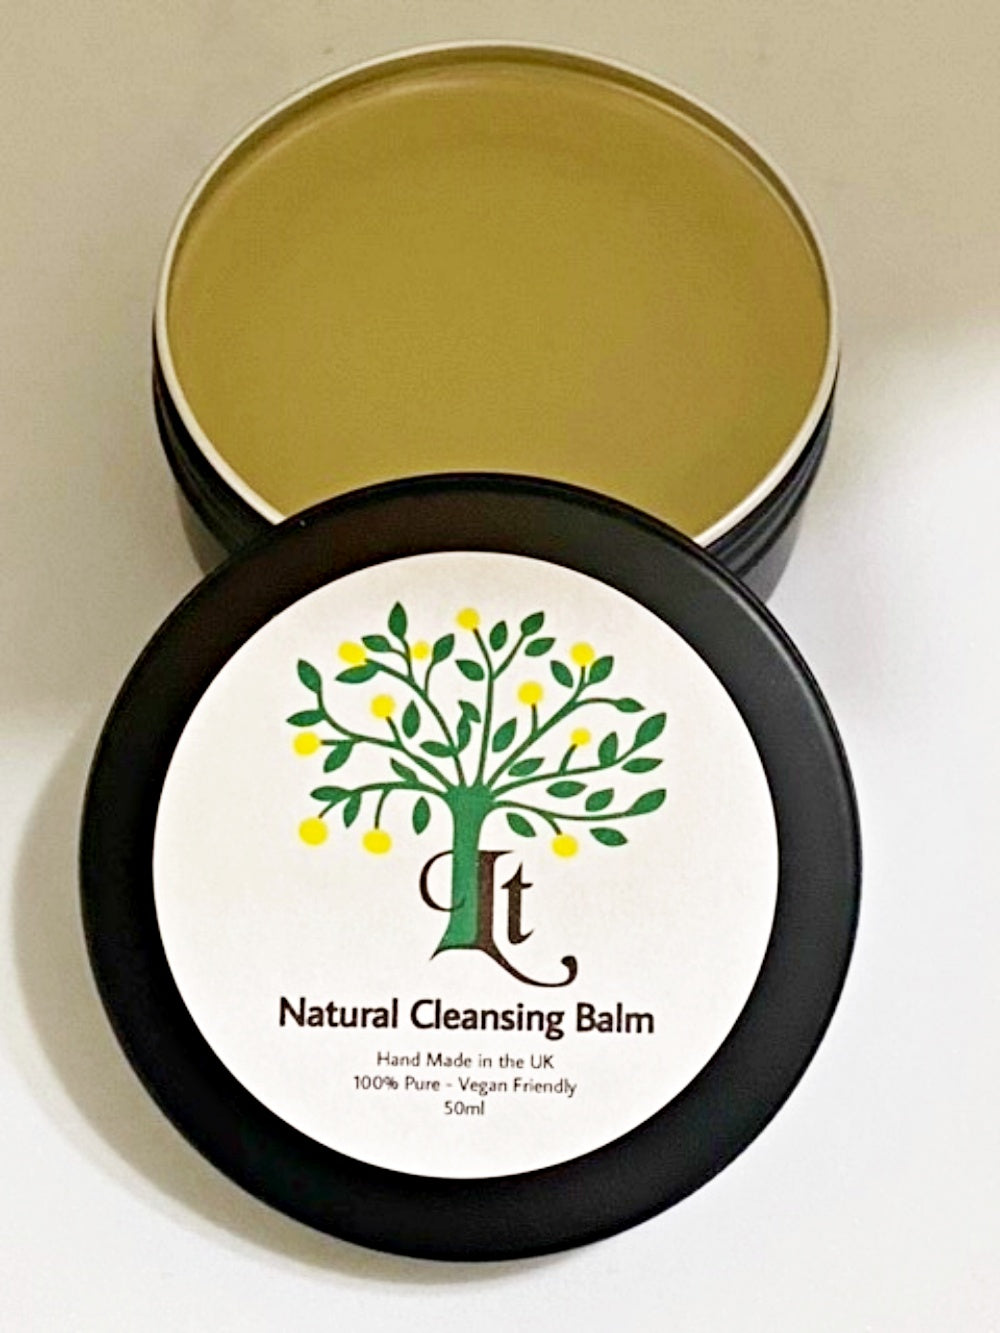 Effortlessly Remove Make Up And Impurities With This  Nourishing 100% Natural Cleansing Balm